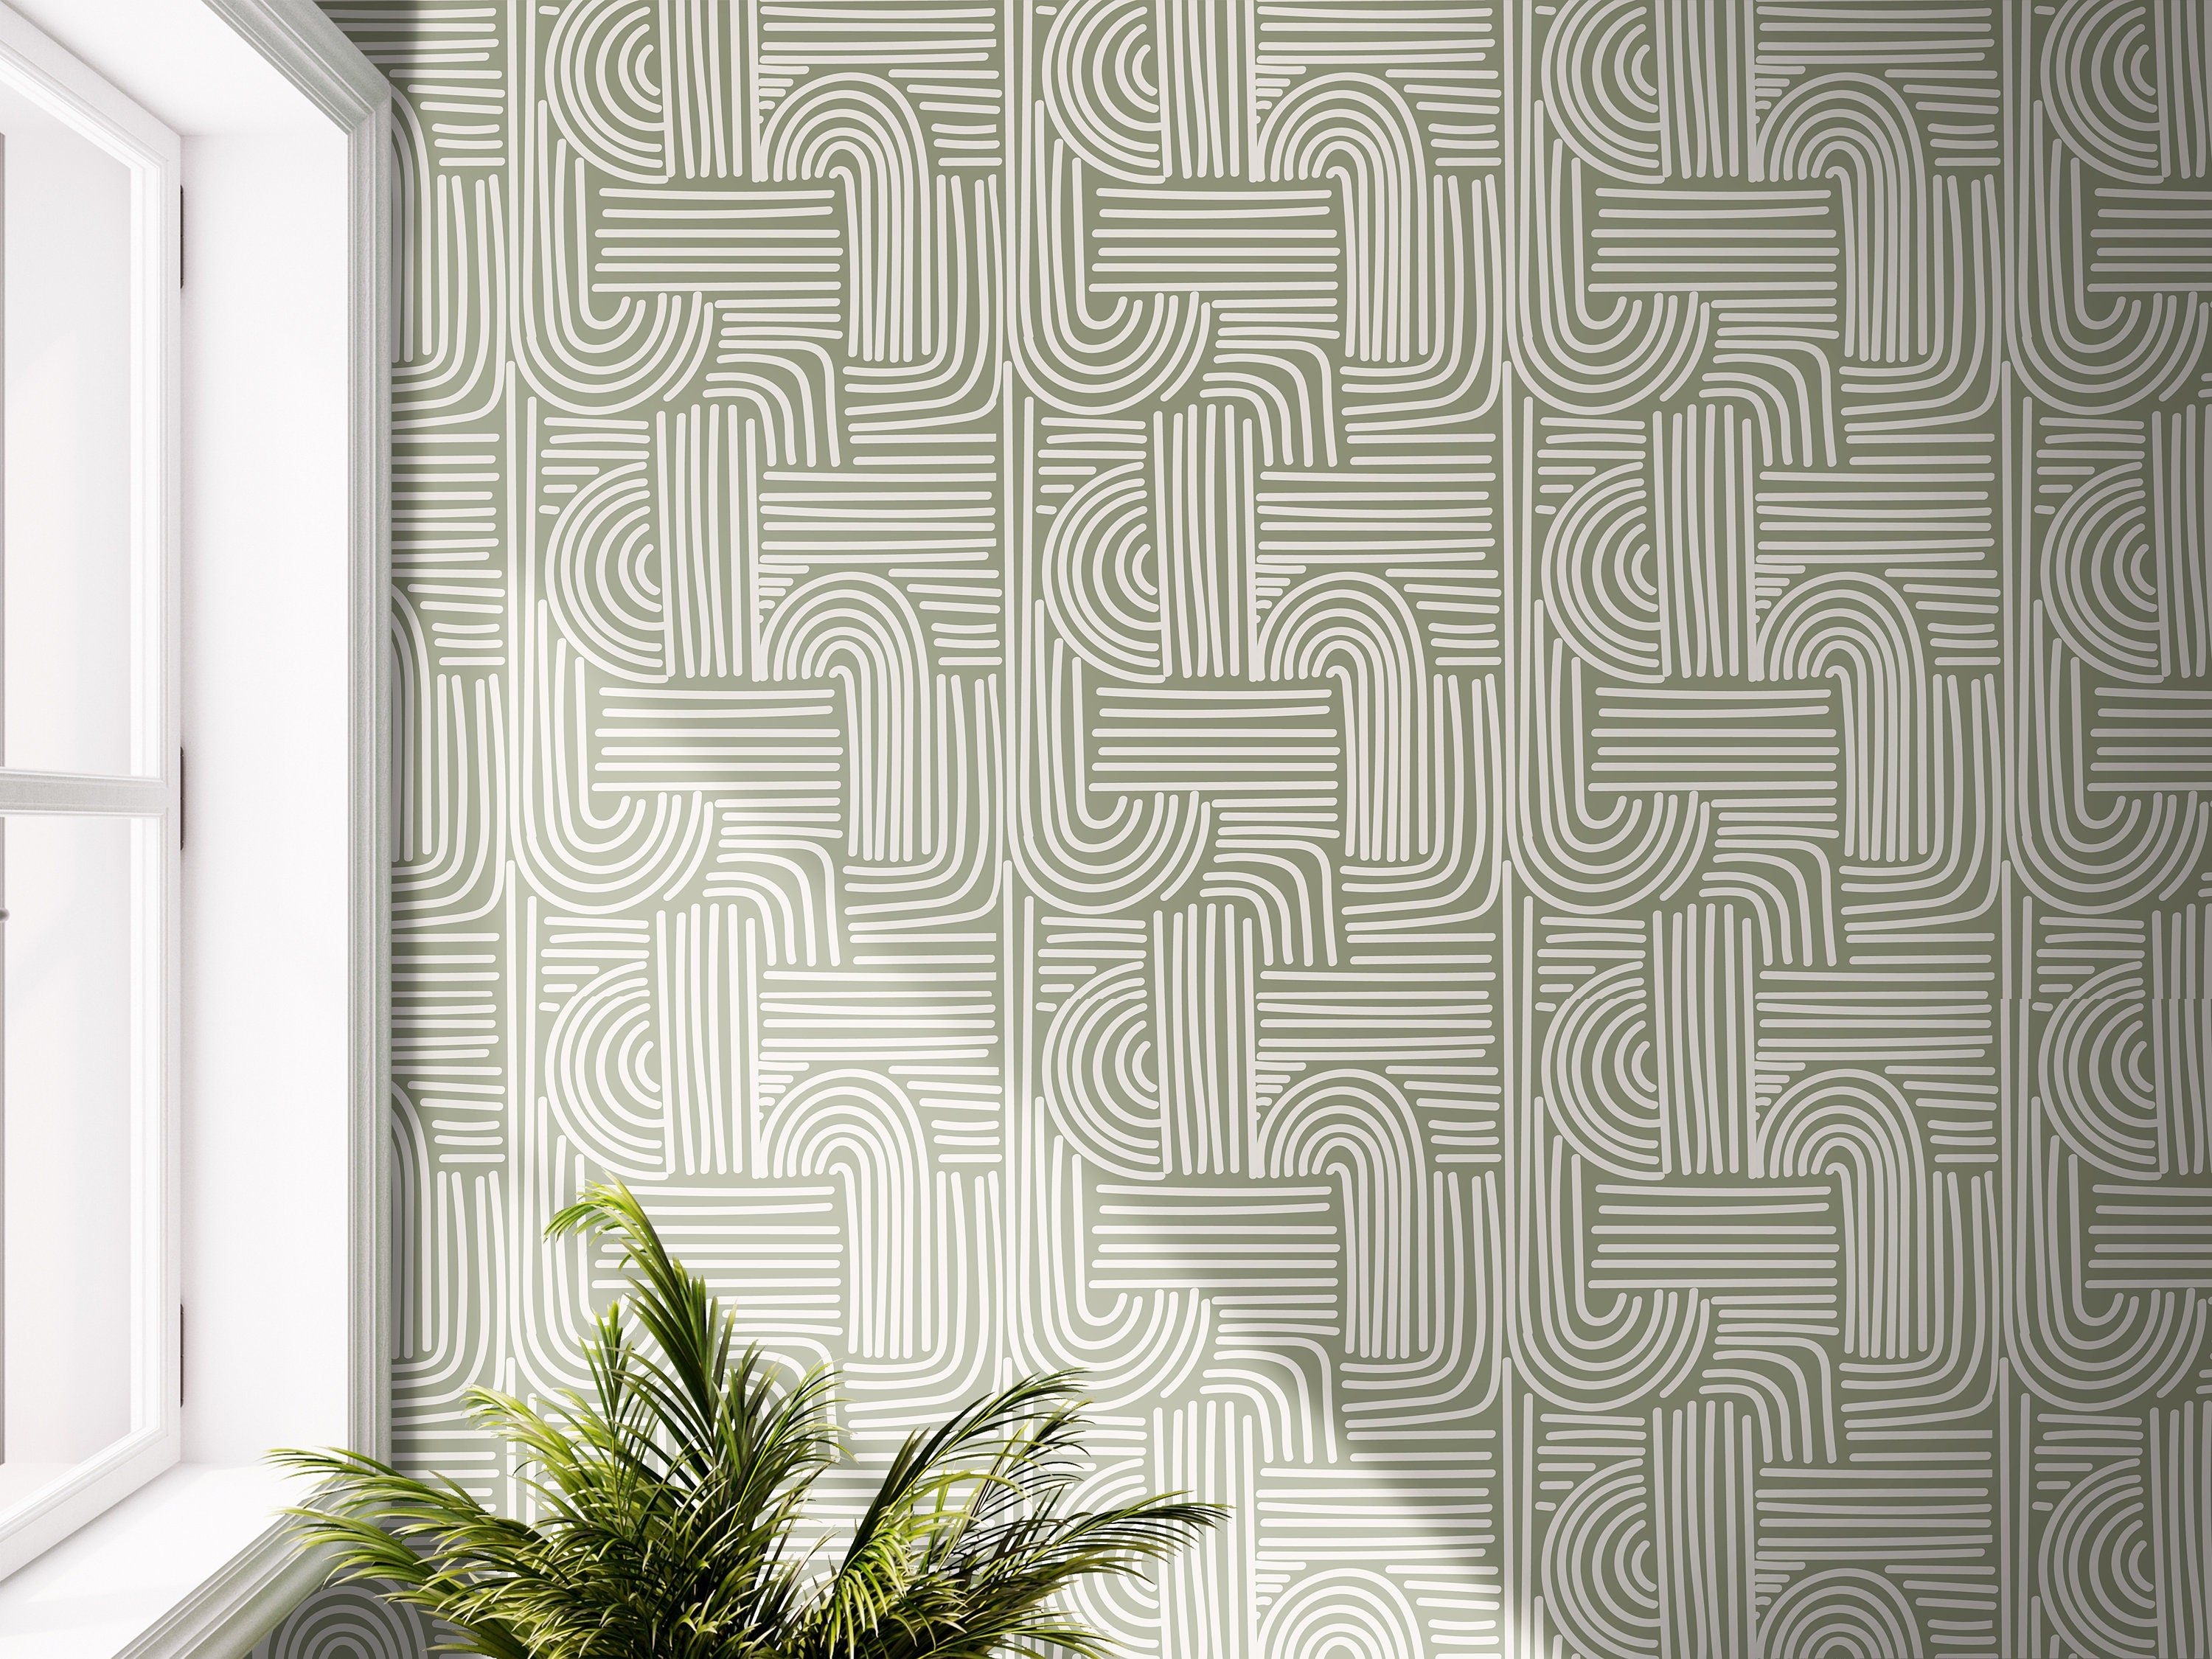 Olive Cream Pattern Wallpaper Peel and Stick Wallpaper Removable Wallpaper Wall Decor Home Decor Wall Art Printable Wall Art Room Decor 3691 - JamesAndColors